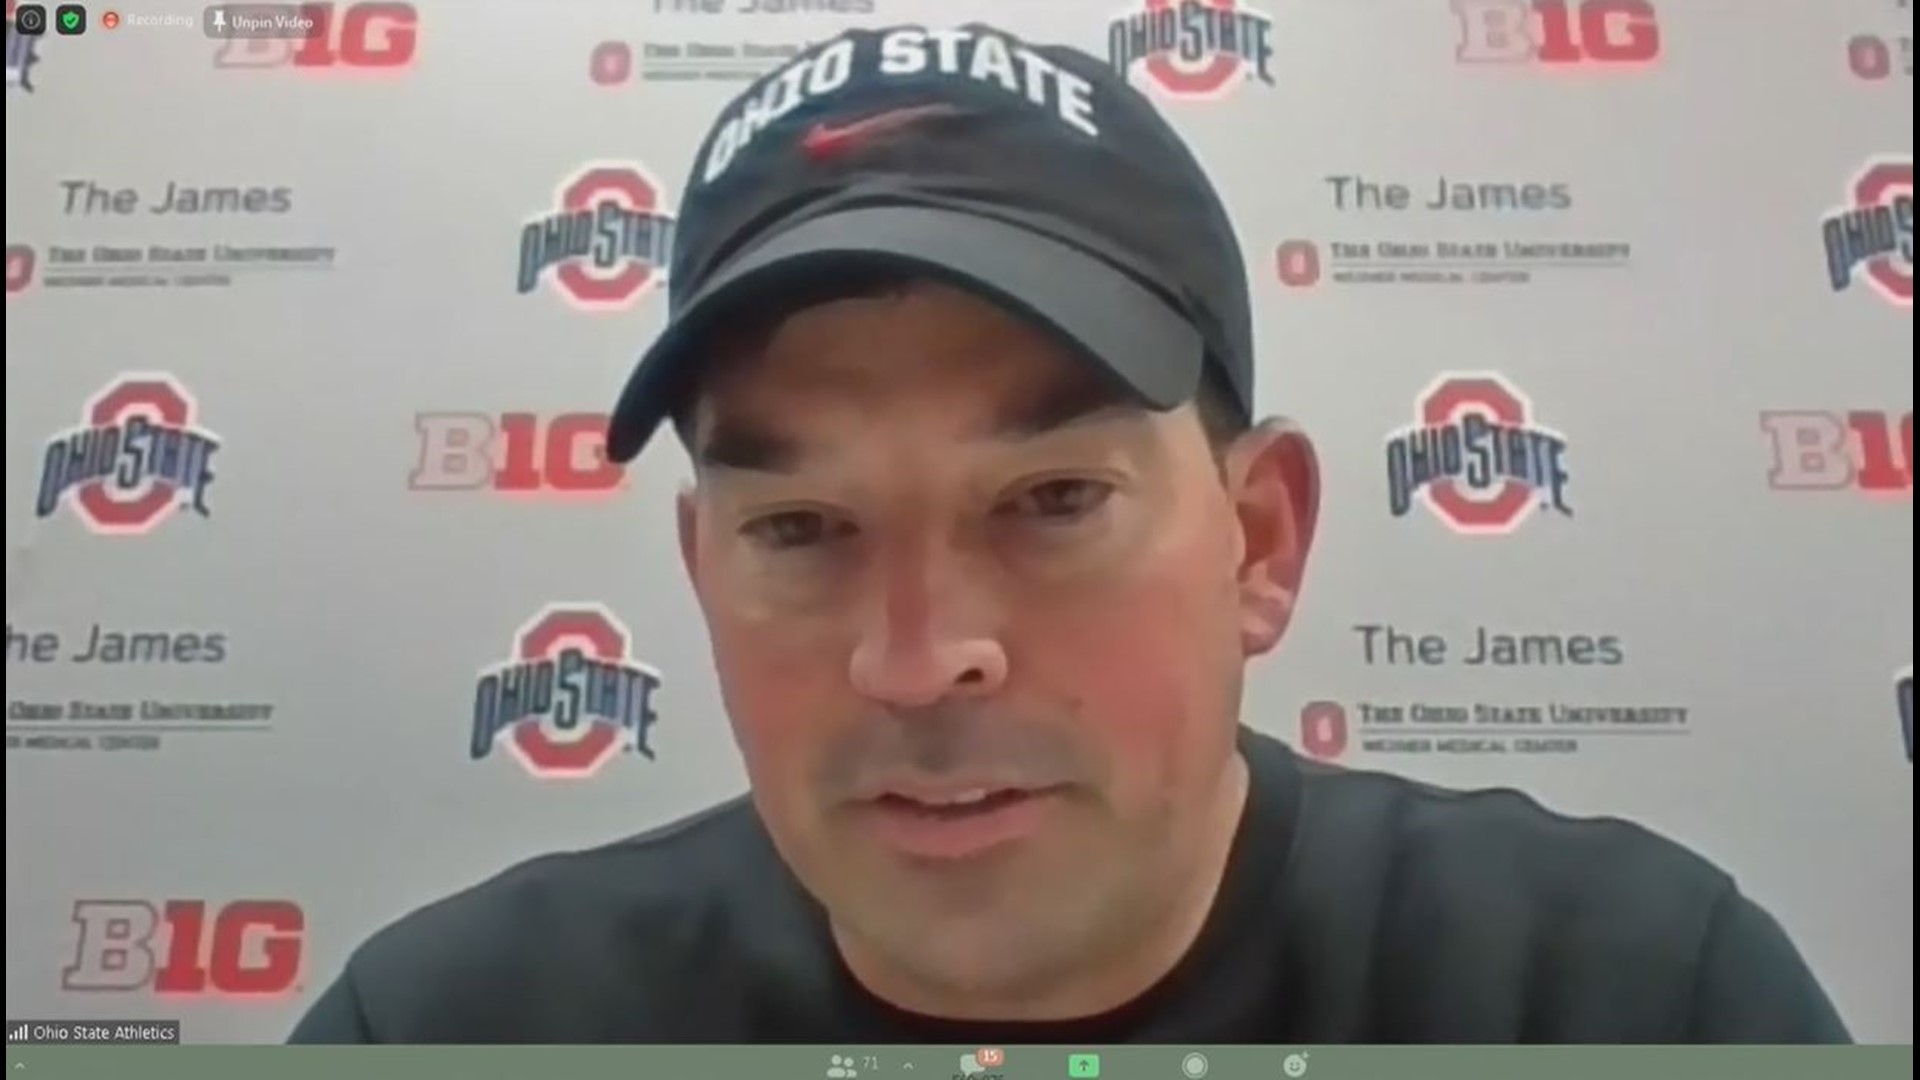 Ohio State's head coach discusses his team's 38-25 win over Penn State.